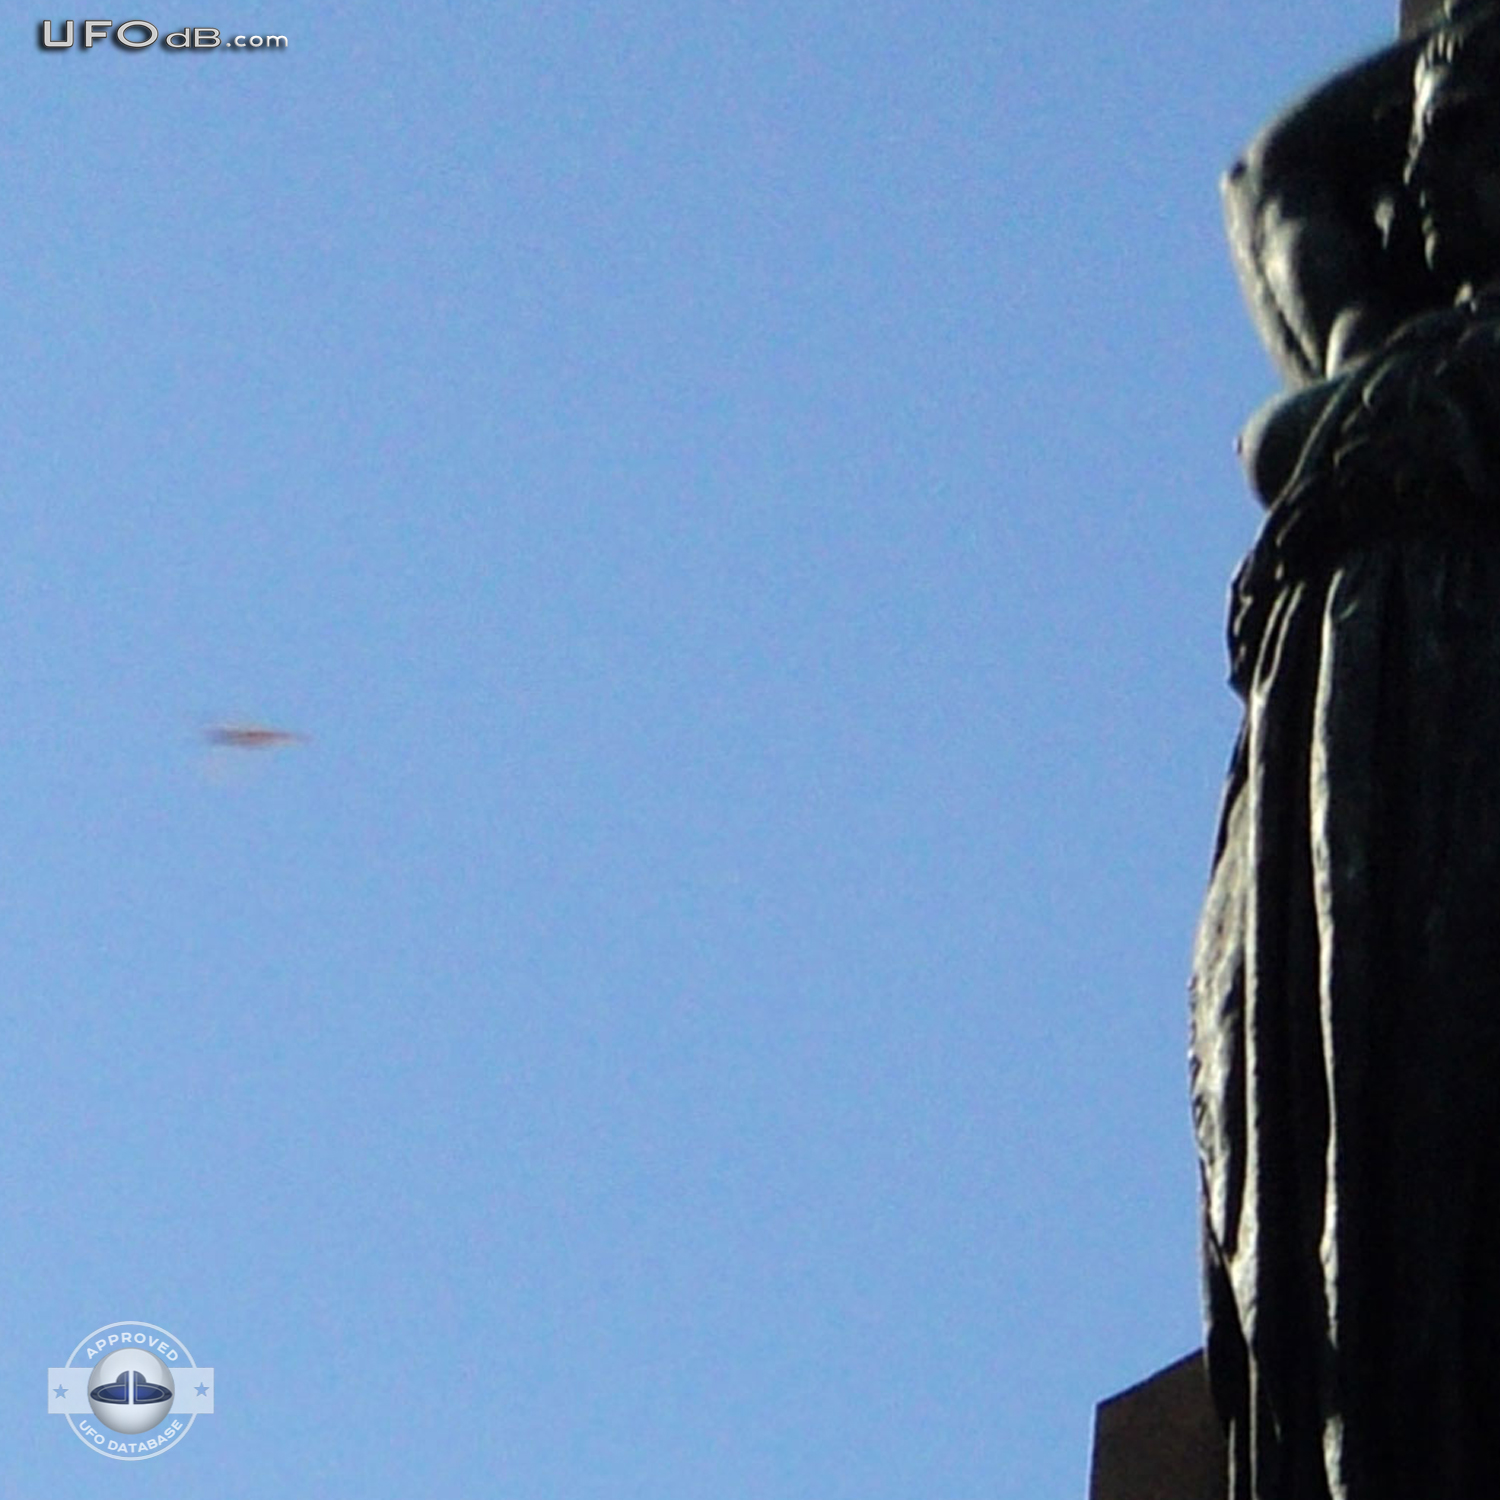 Photo Contest shot capture a passing UFO in Uruguay | May 18 2011 UFO Picture #329-2